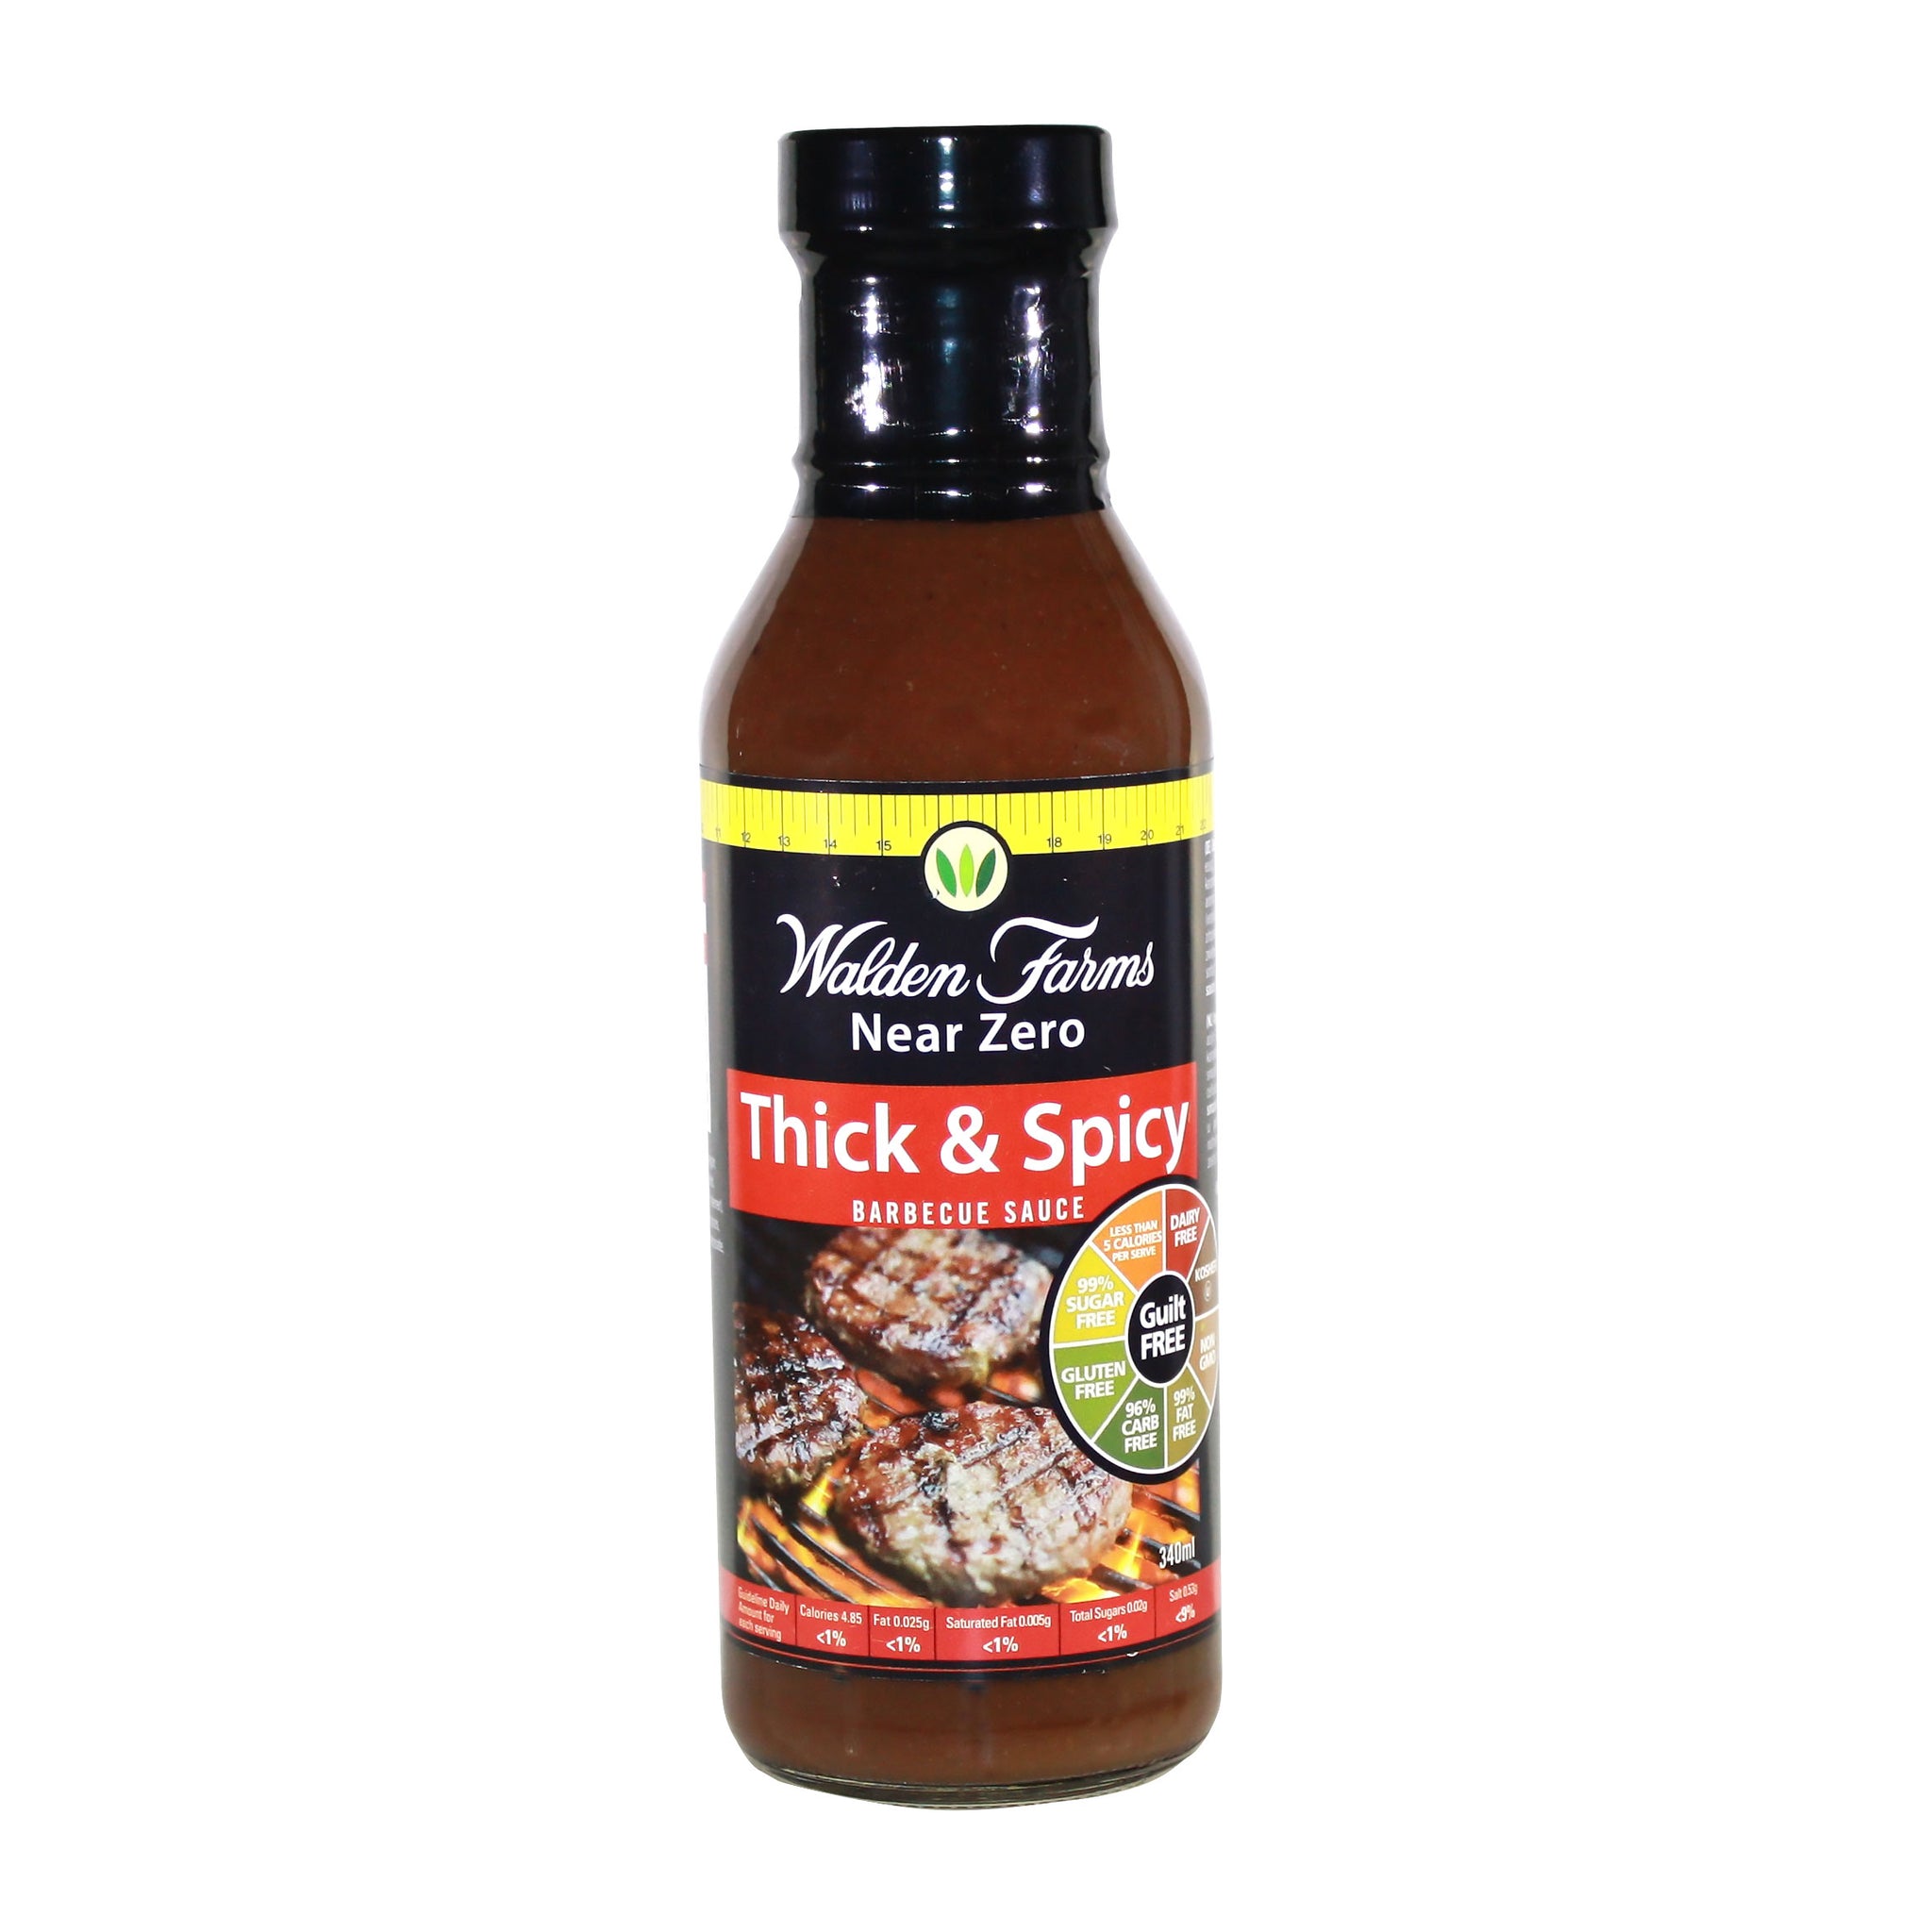 Gluten Free Thick 'n' Spicy Barbecue Sauce